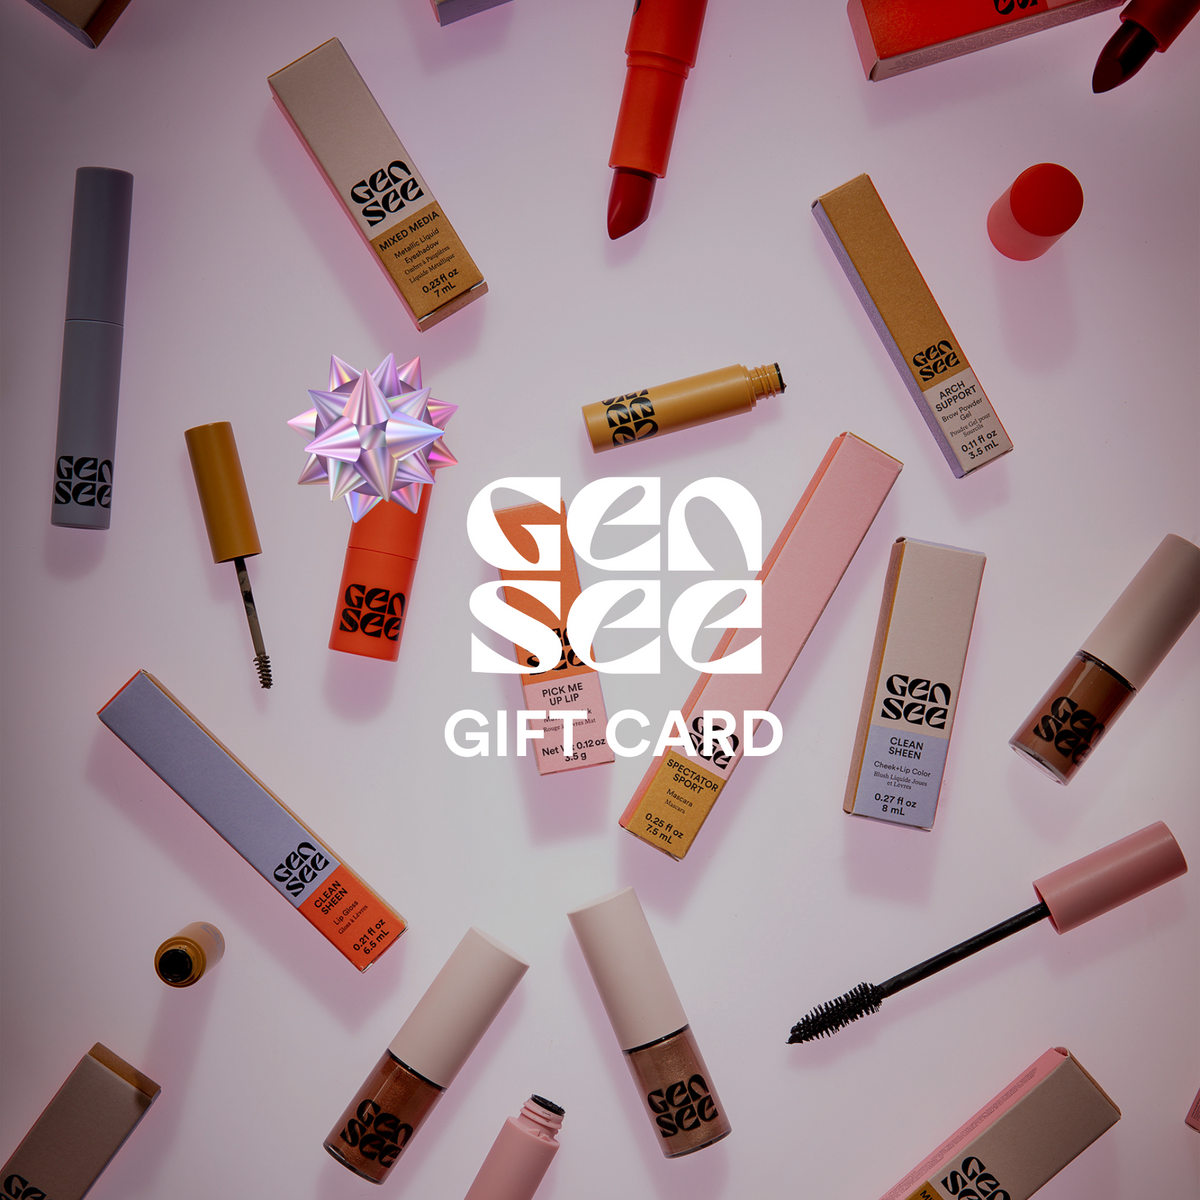 Gen See Gift card